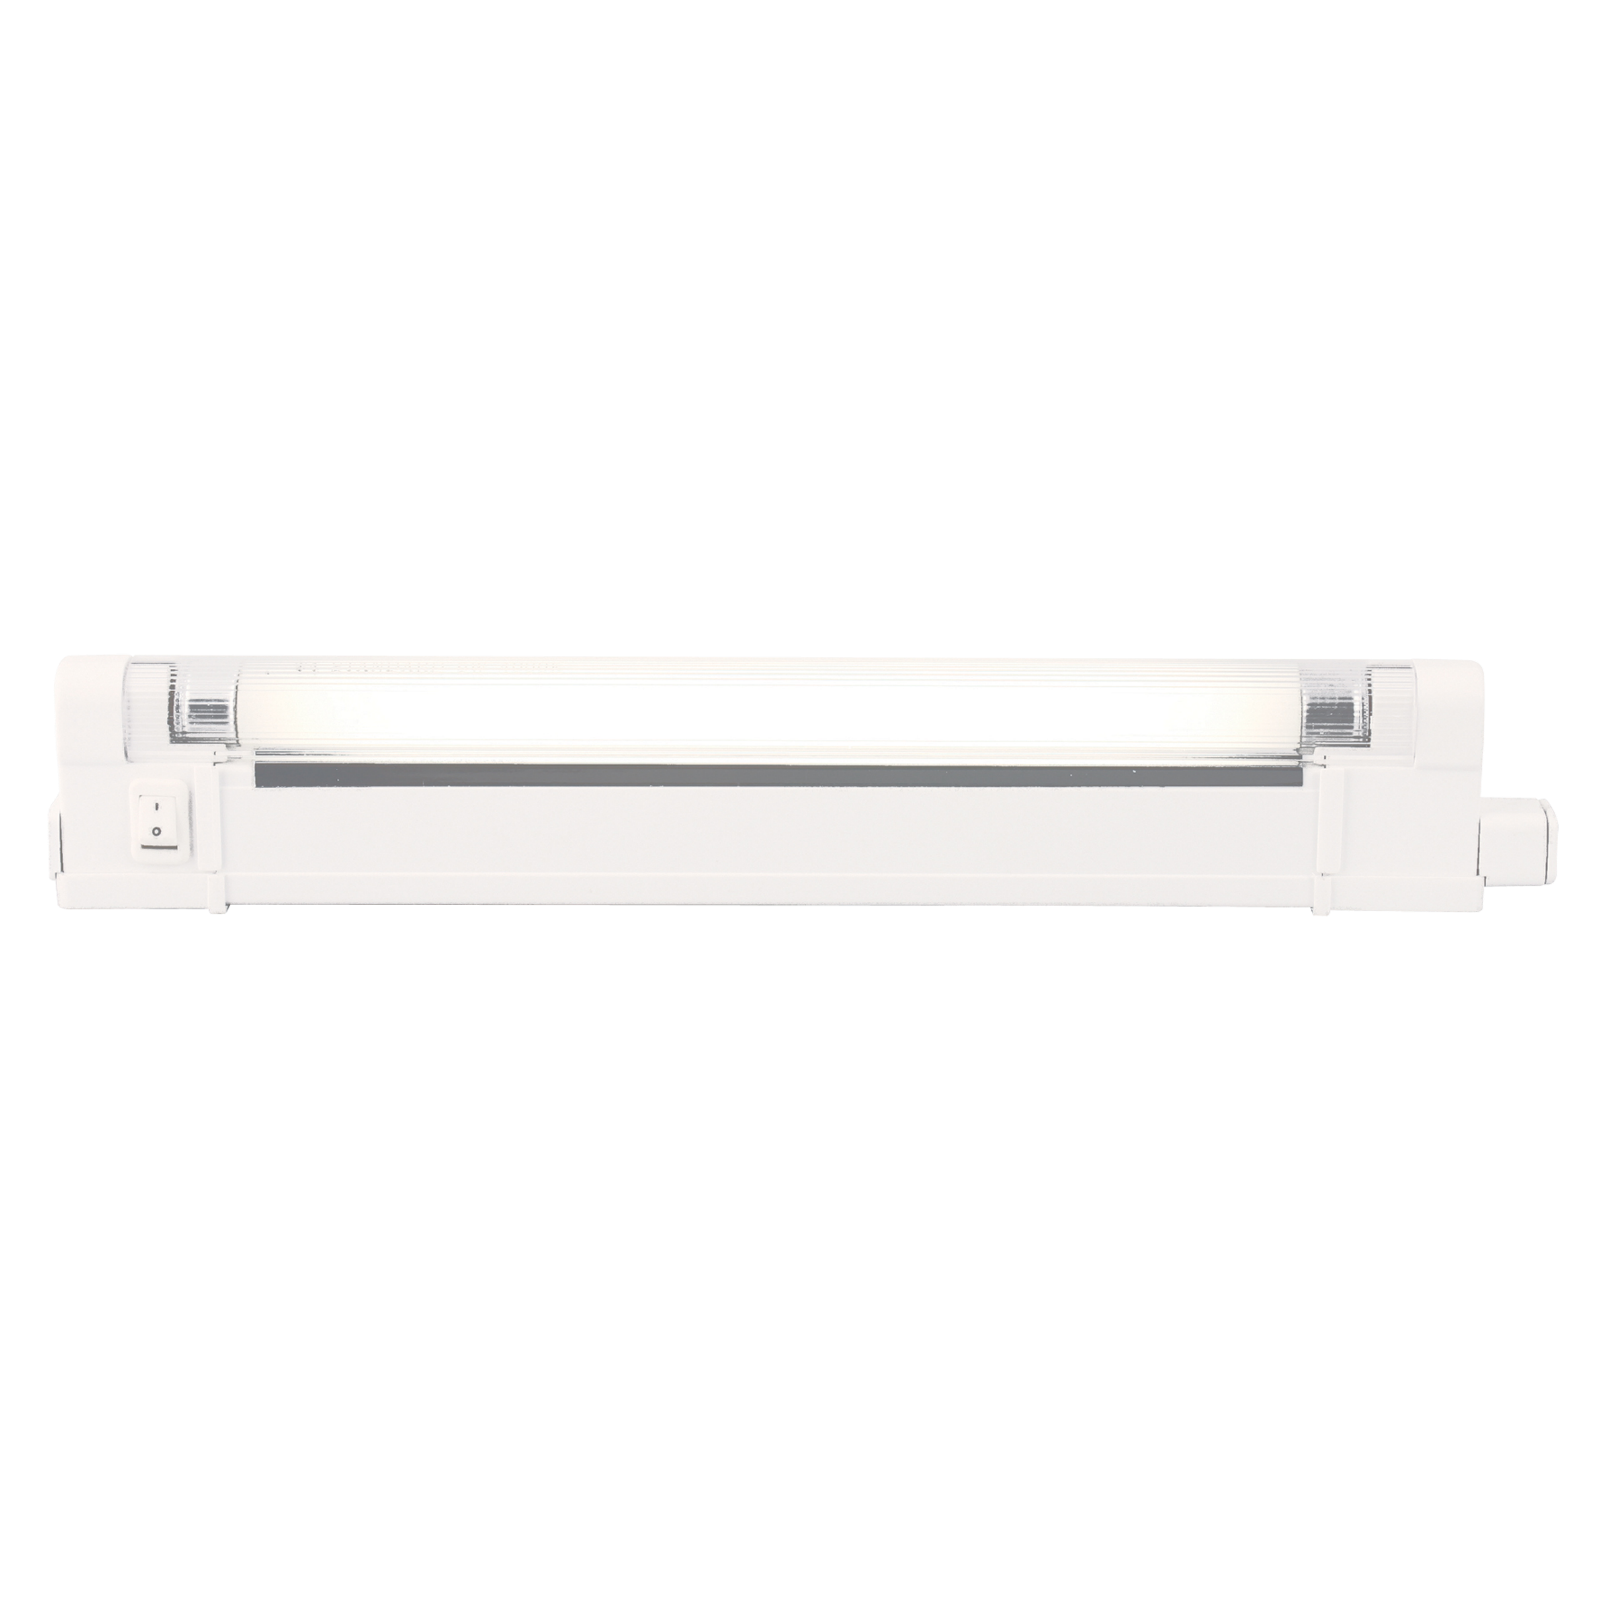 IP20 6W T4 Fluorescent Fitting With Tube, Switch And Diffuser 4000K - T46A 